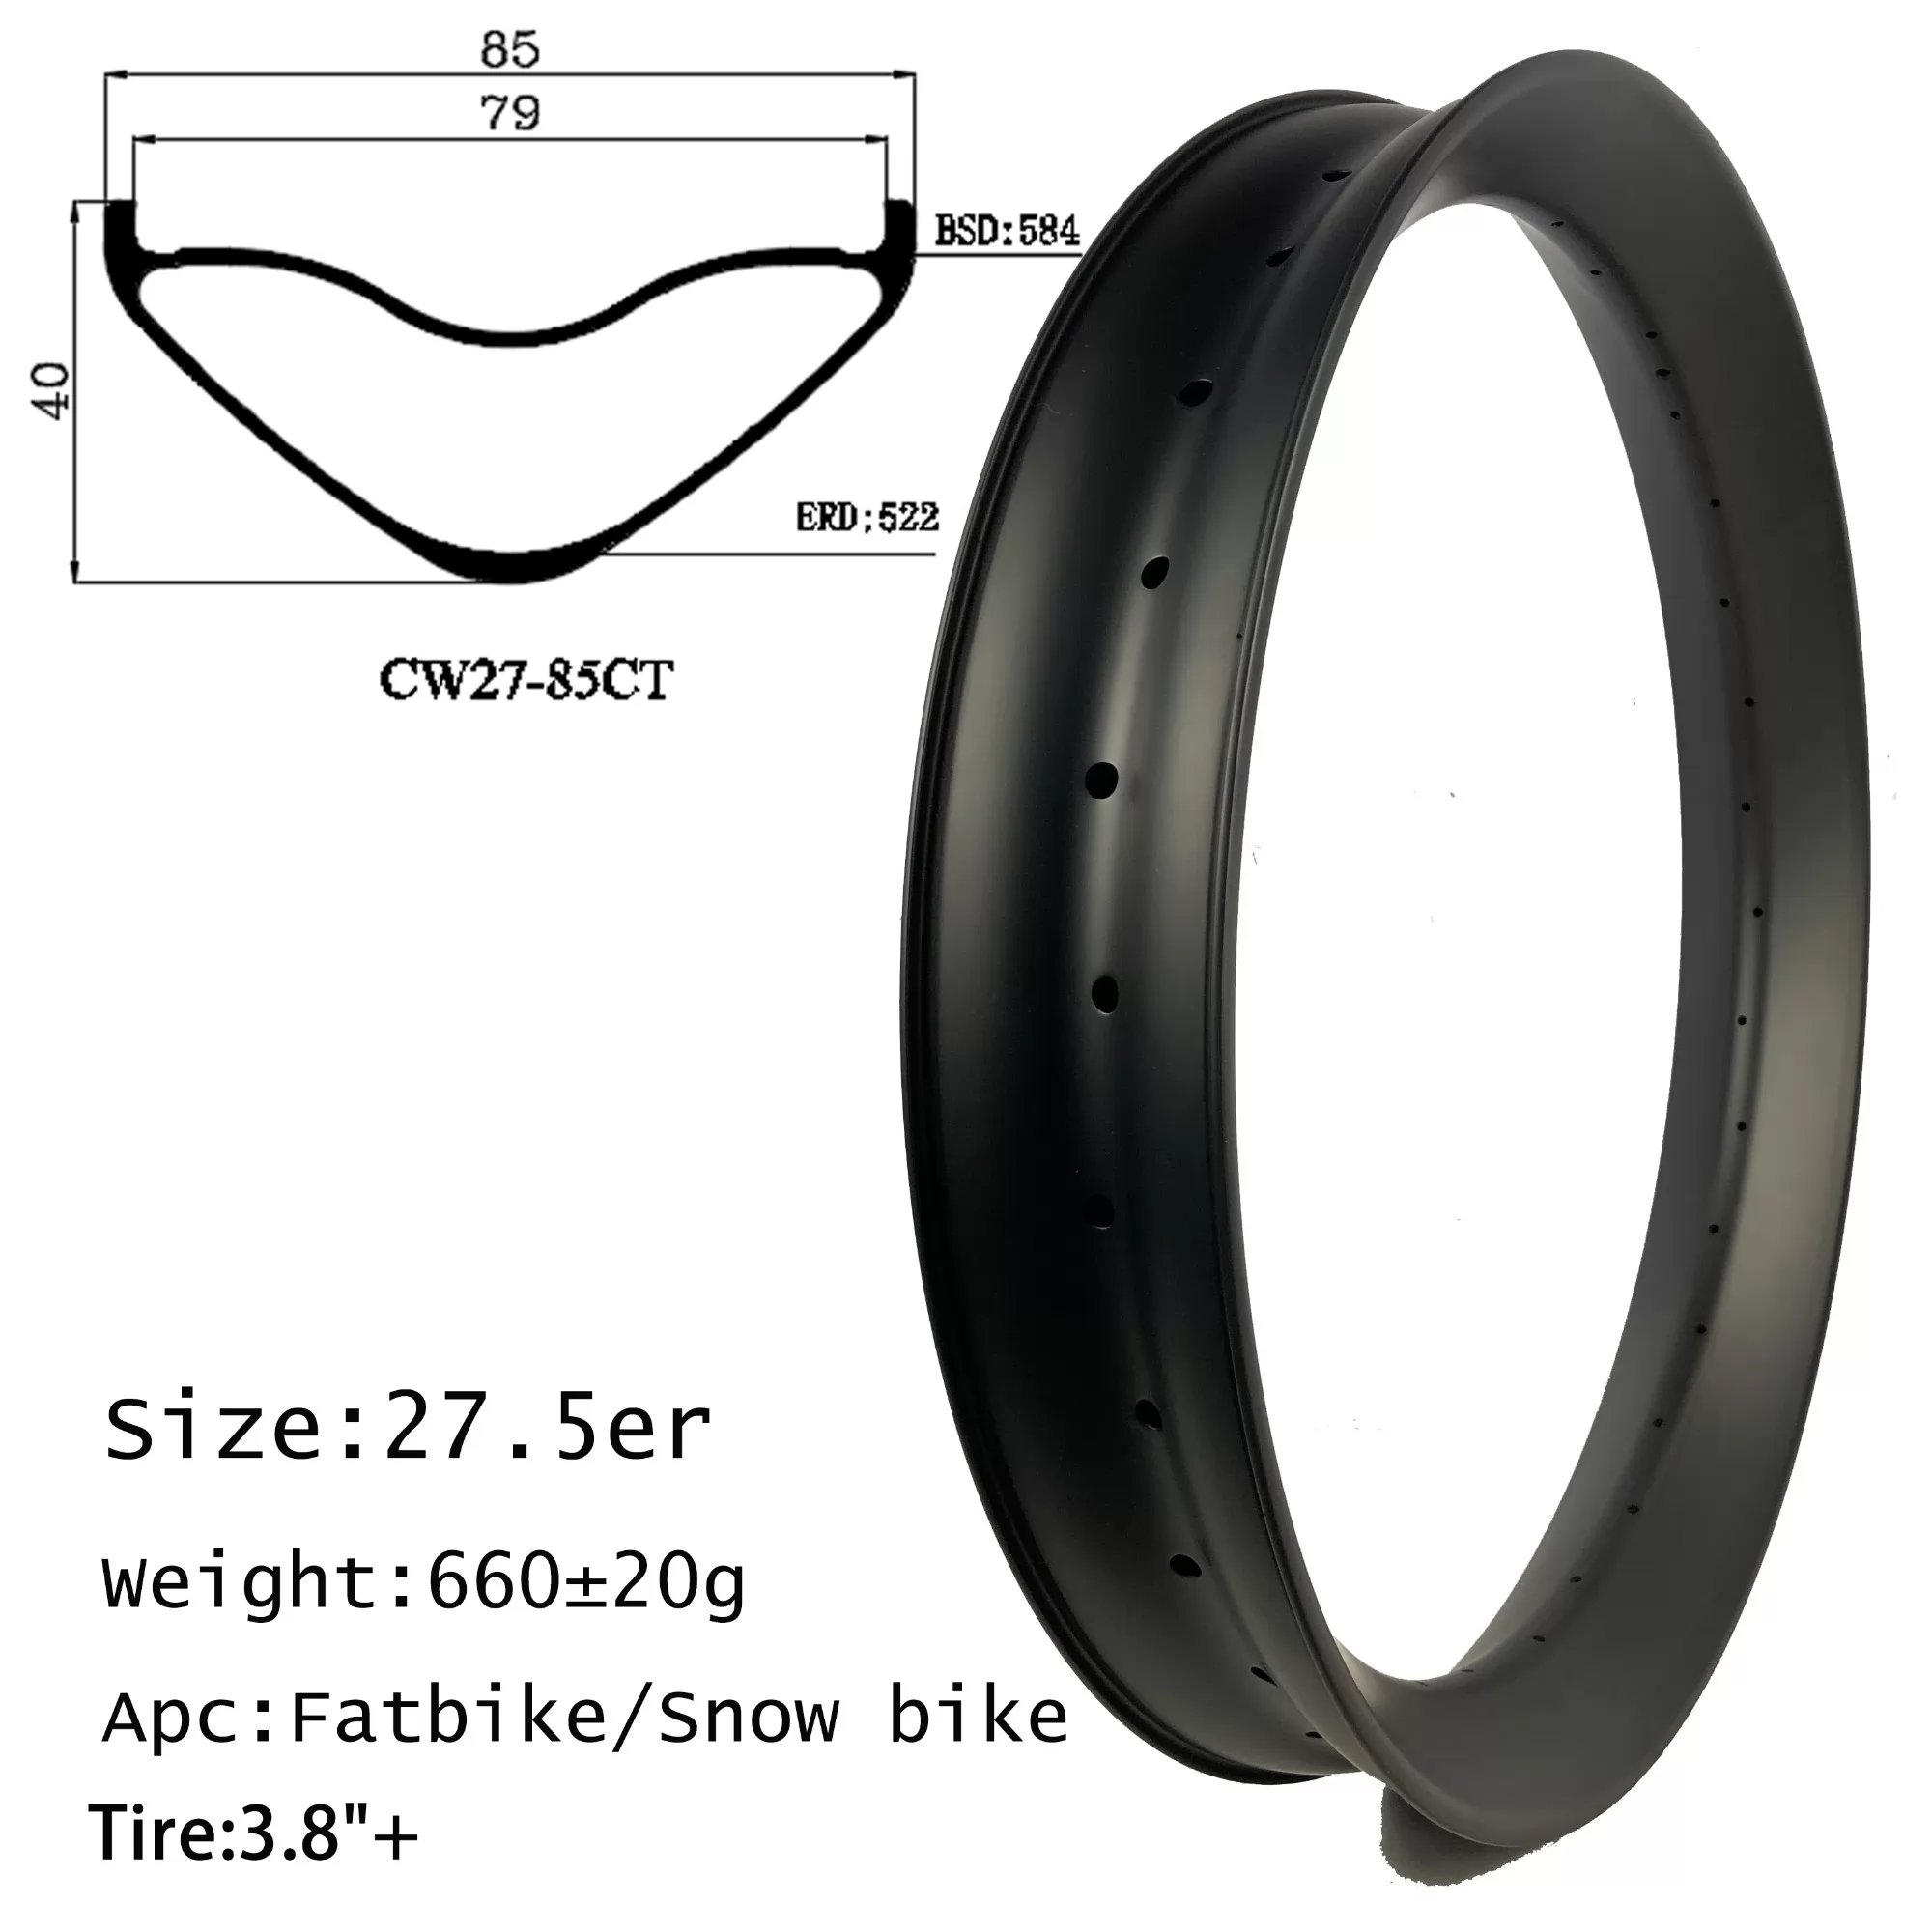 |CW27-85CT| 27.5er carbon fat bike rim 85mm width 40mm depth clincher tubeless hookless snowy day free ride high quality competitive price offer